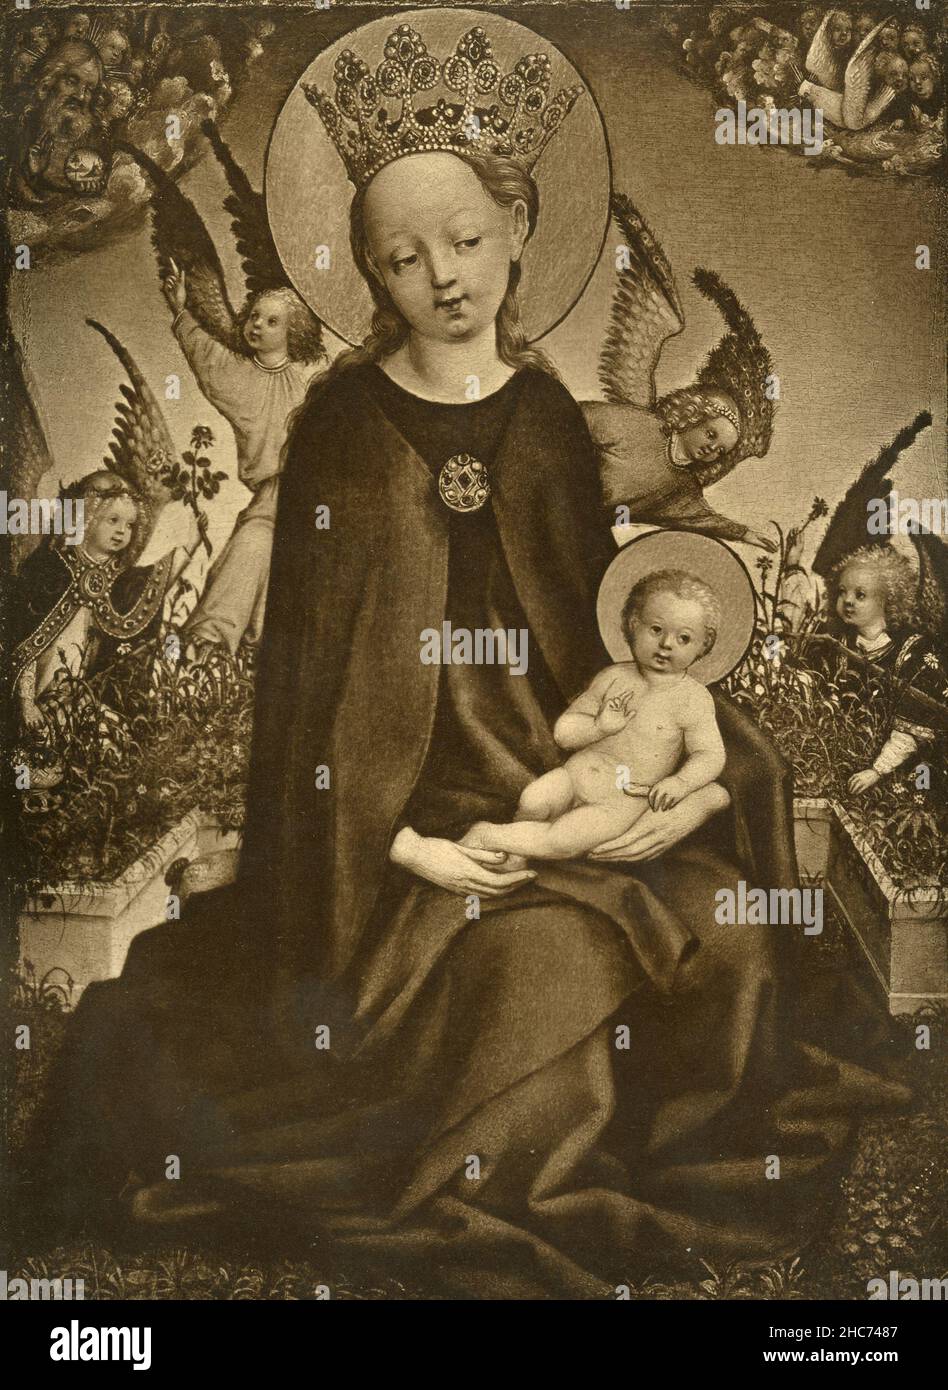 Madonna of the Rose Bower, painting by German artist Stephan Lochner, Munich 1897 Stock Photo